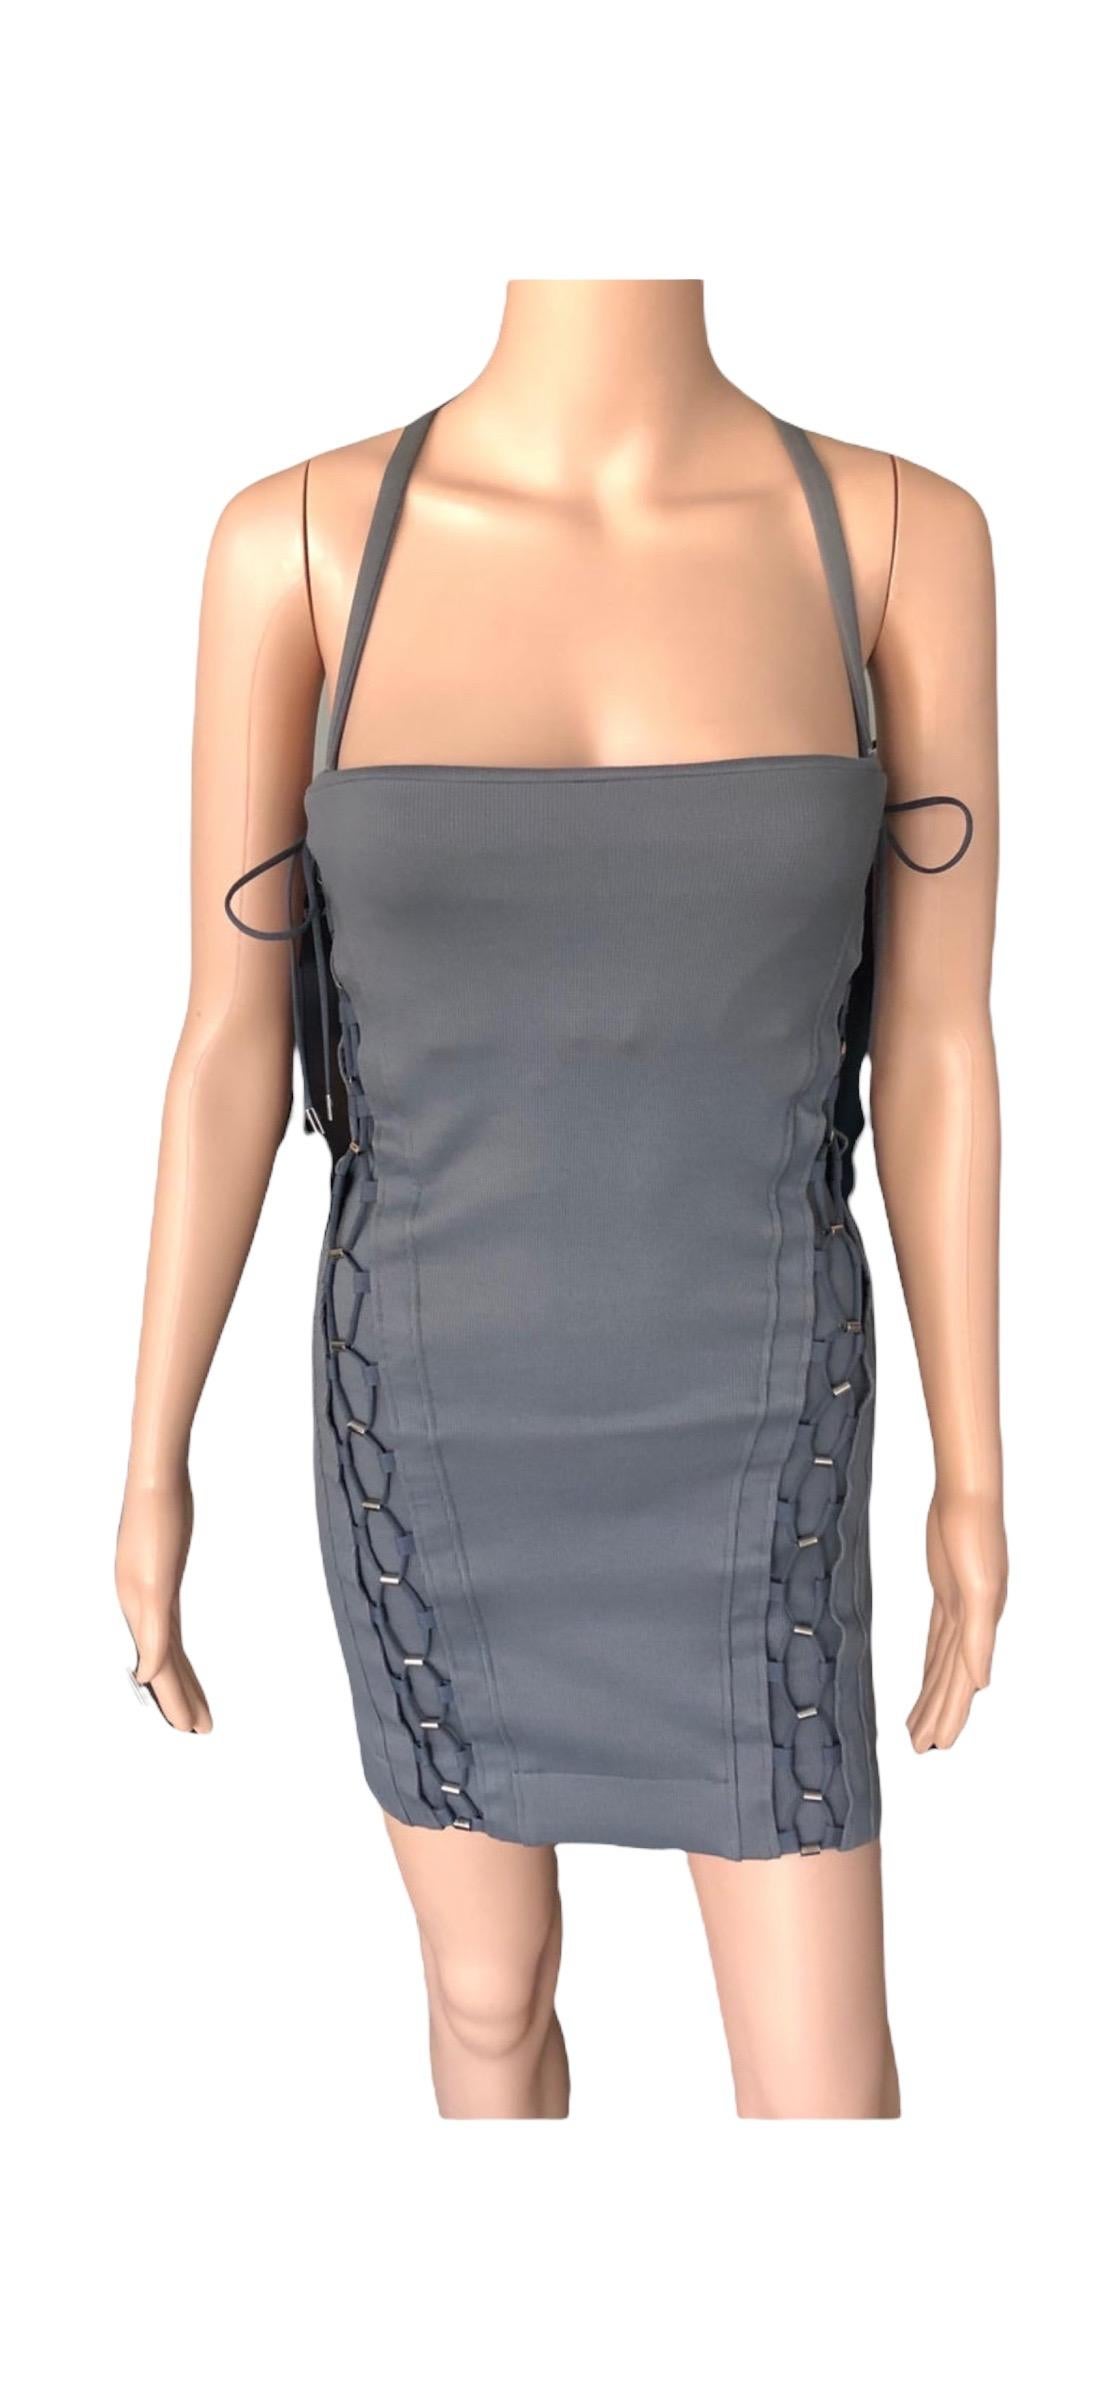 Gucci S/S 2010 Bodycon Lace Up Bandage Grey Mini Dress In Good Condition For Sale In Naples, FL